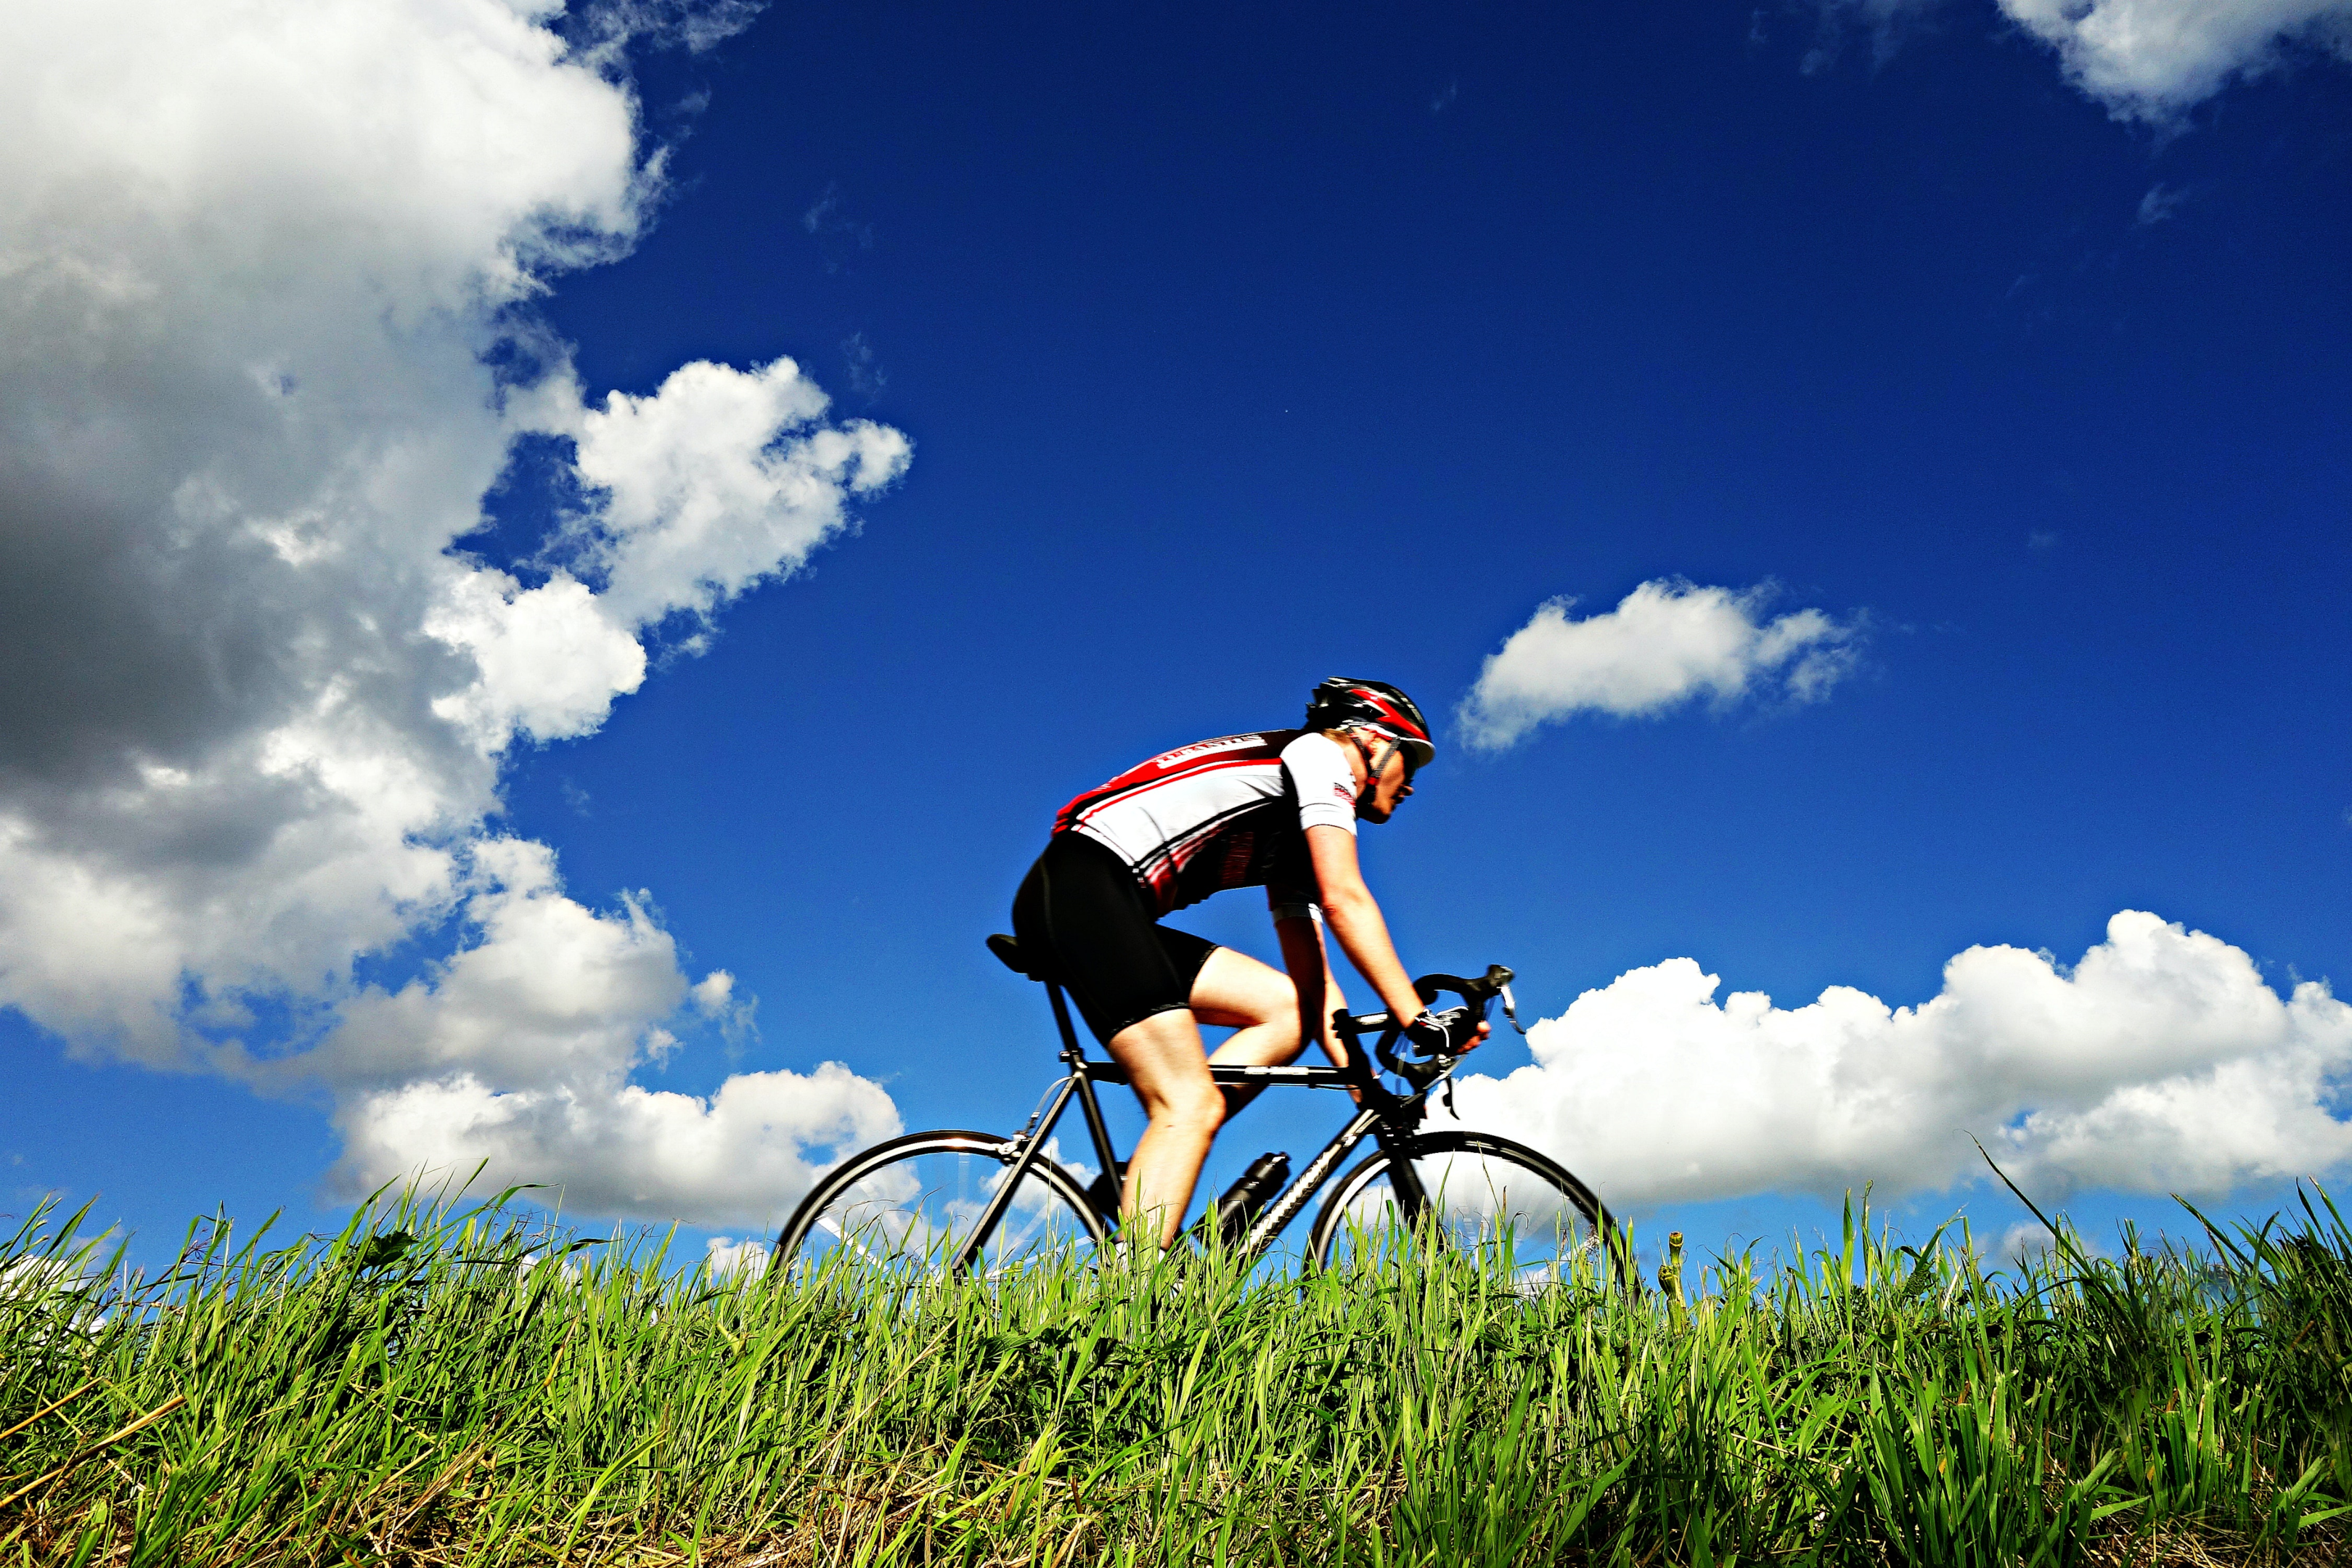 Cycling can be both a competitive sport and a low-impact recreational activity | Photo by Mabel Amber from Pexels